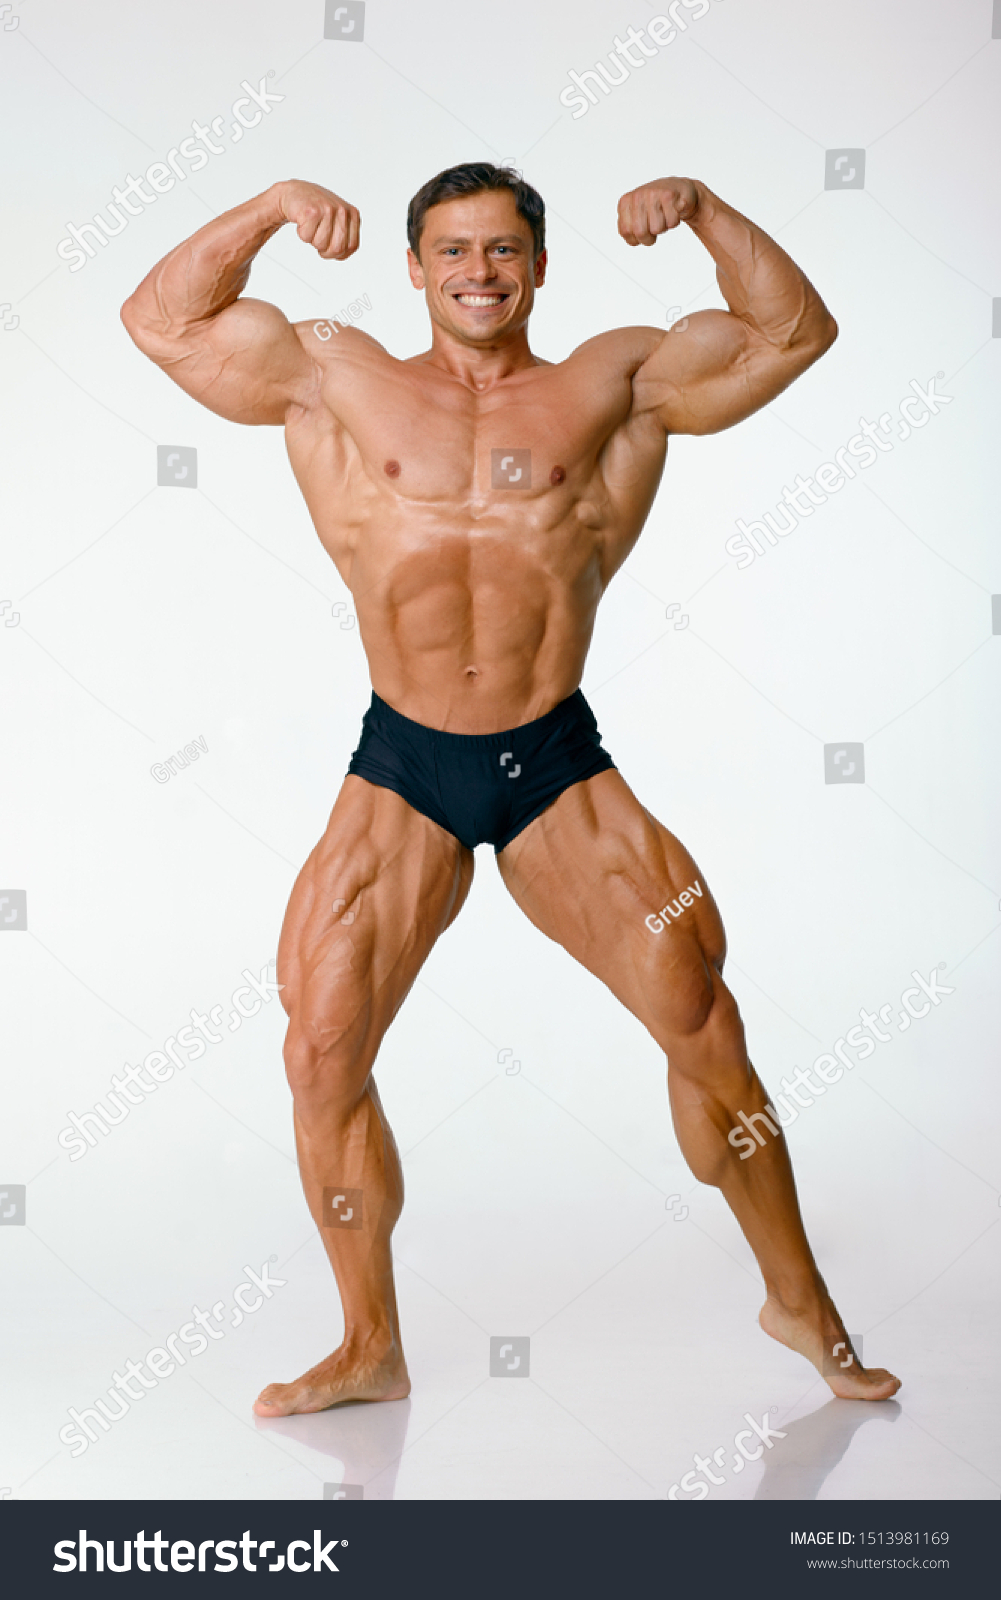 Young athlete, bodybuilder, on a white background in full growth, front view. Biceps, shoulders, torso, legs, sports body, muscle posing #1513981169